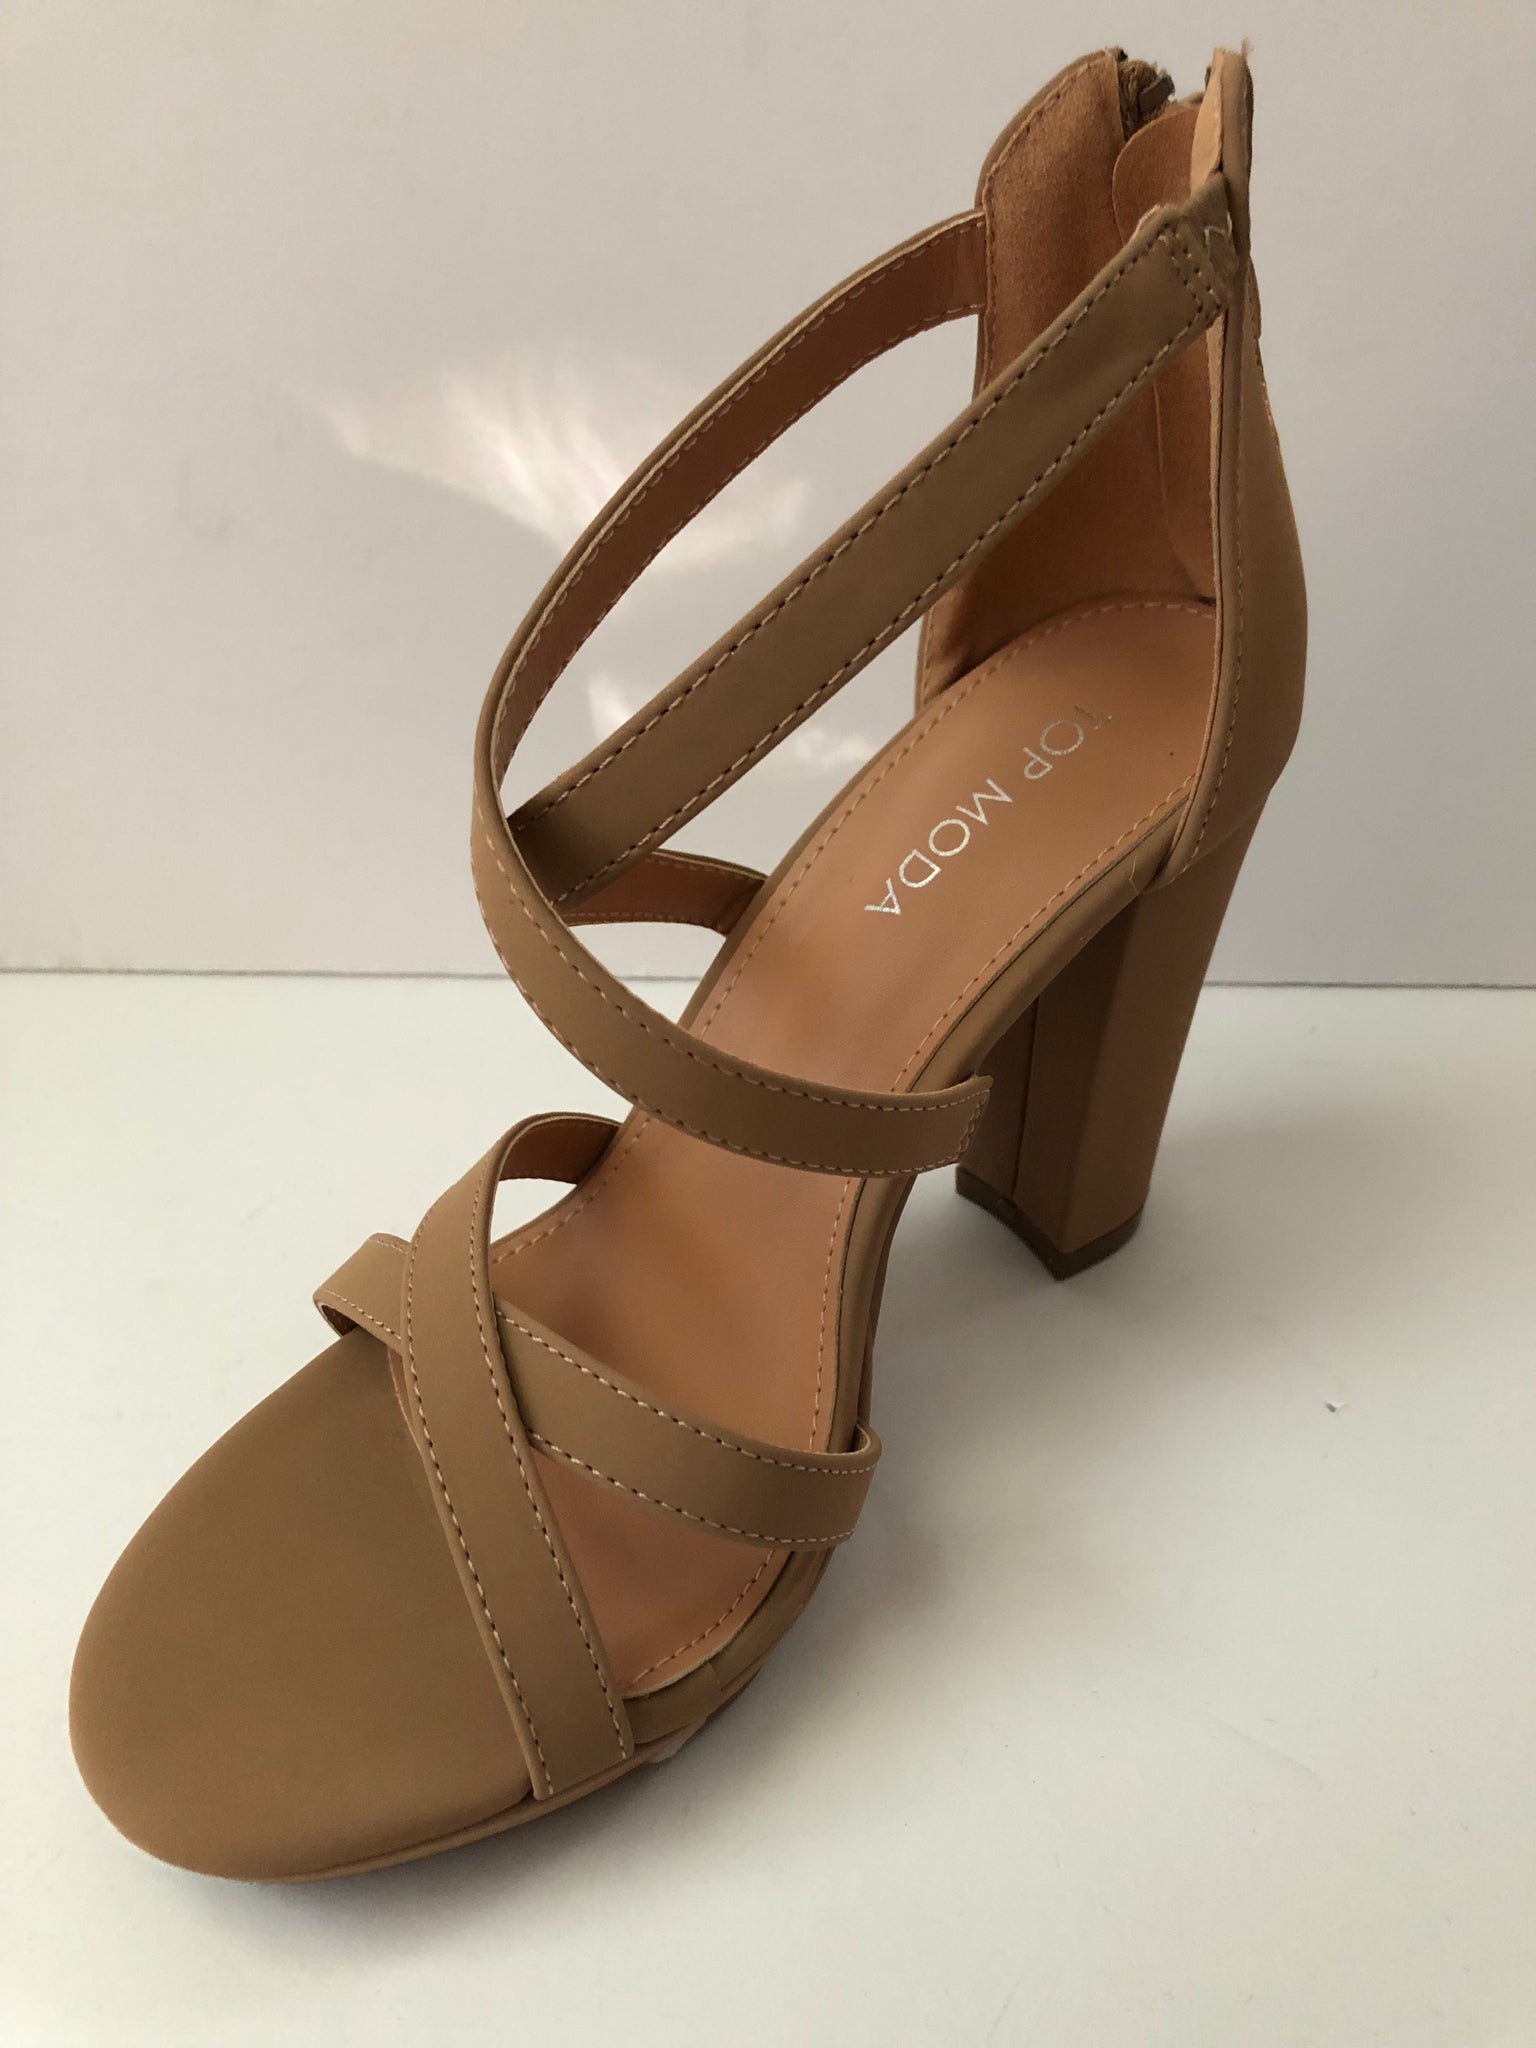 Franco Sarto Women's shoes Leather Open Toe Heels 2 5 inches camel/white  color | eBay